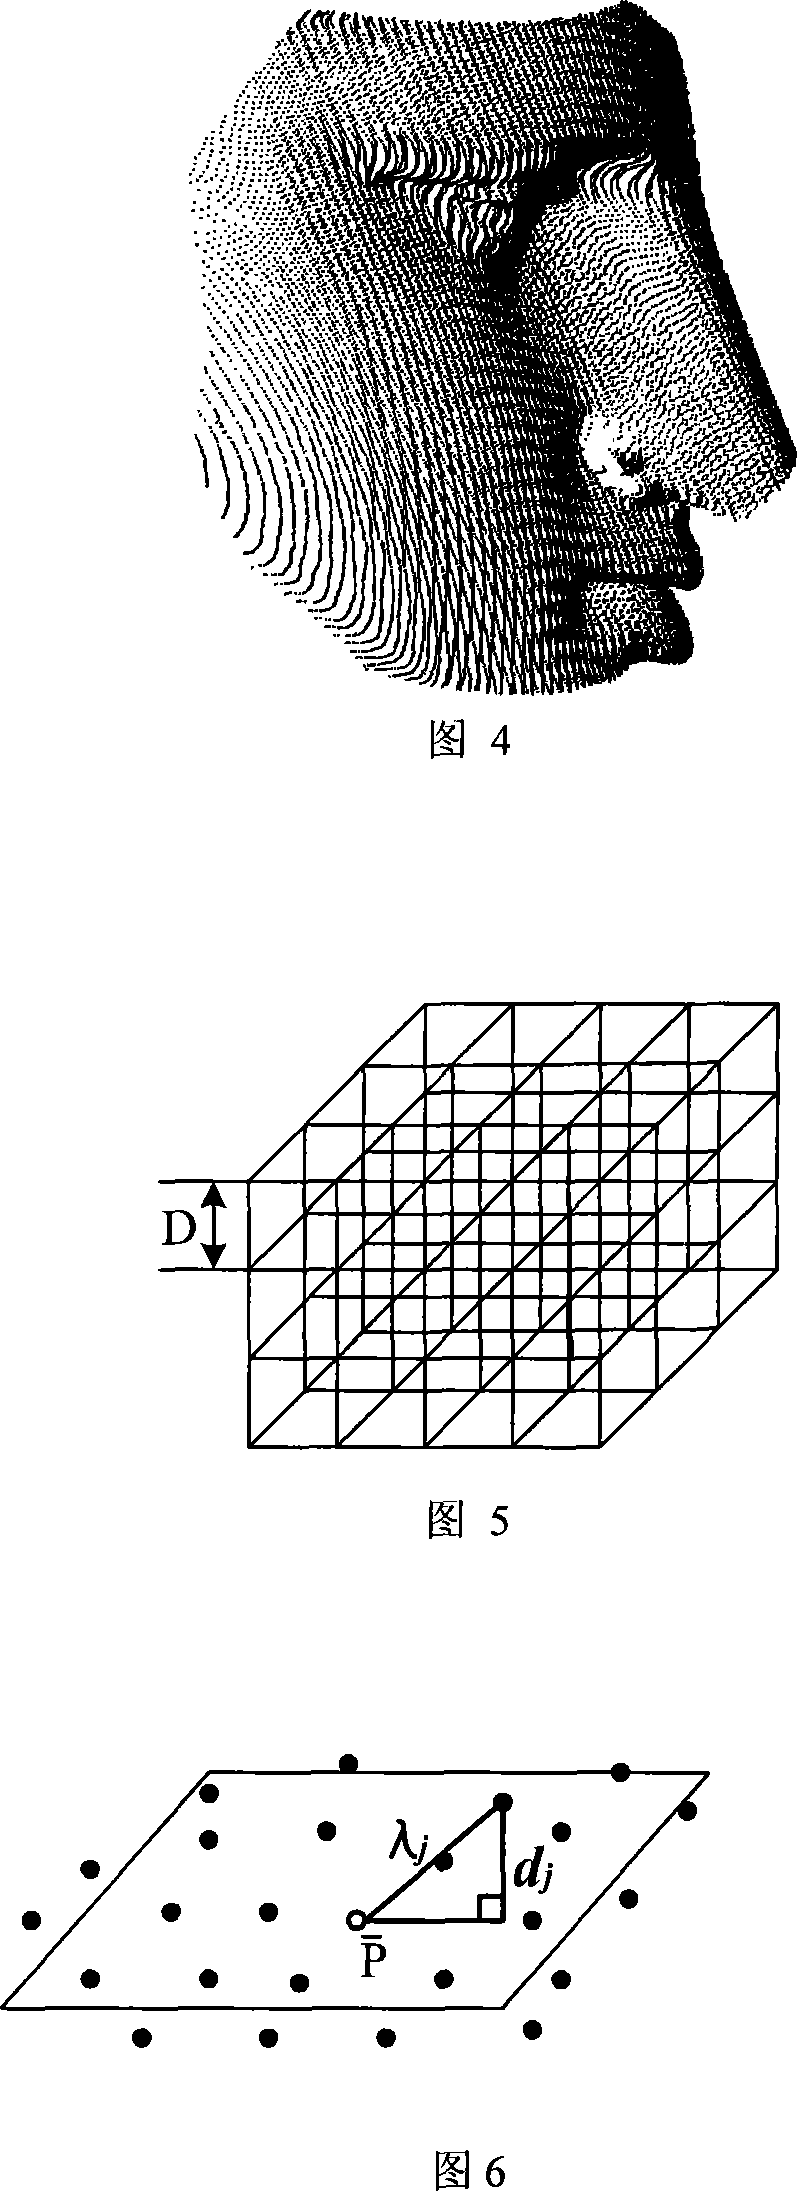 Three-dimensional scanning point cloud compressing method